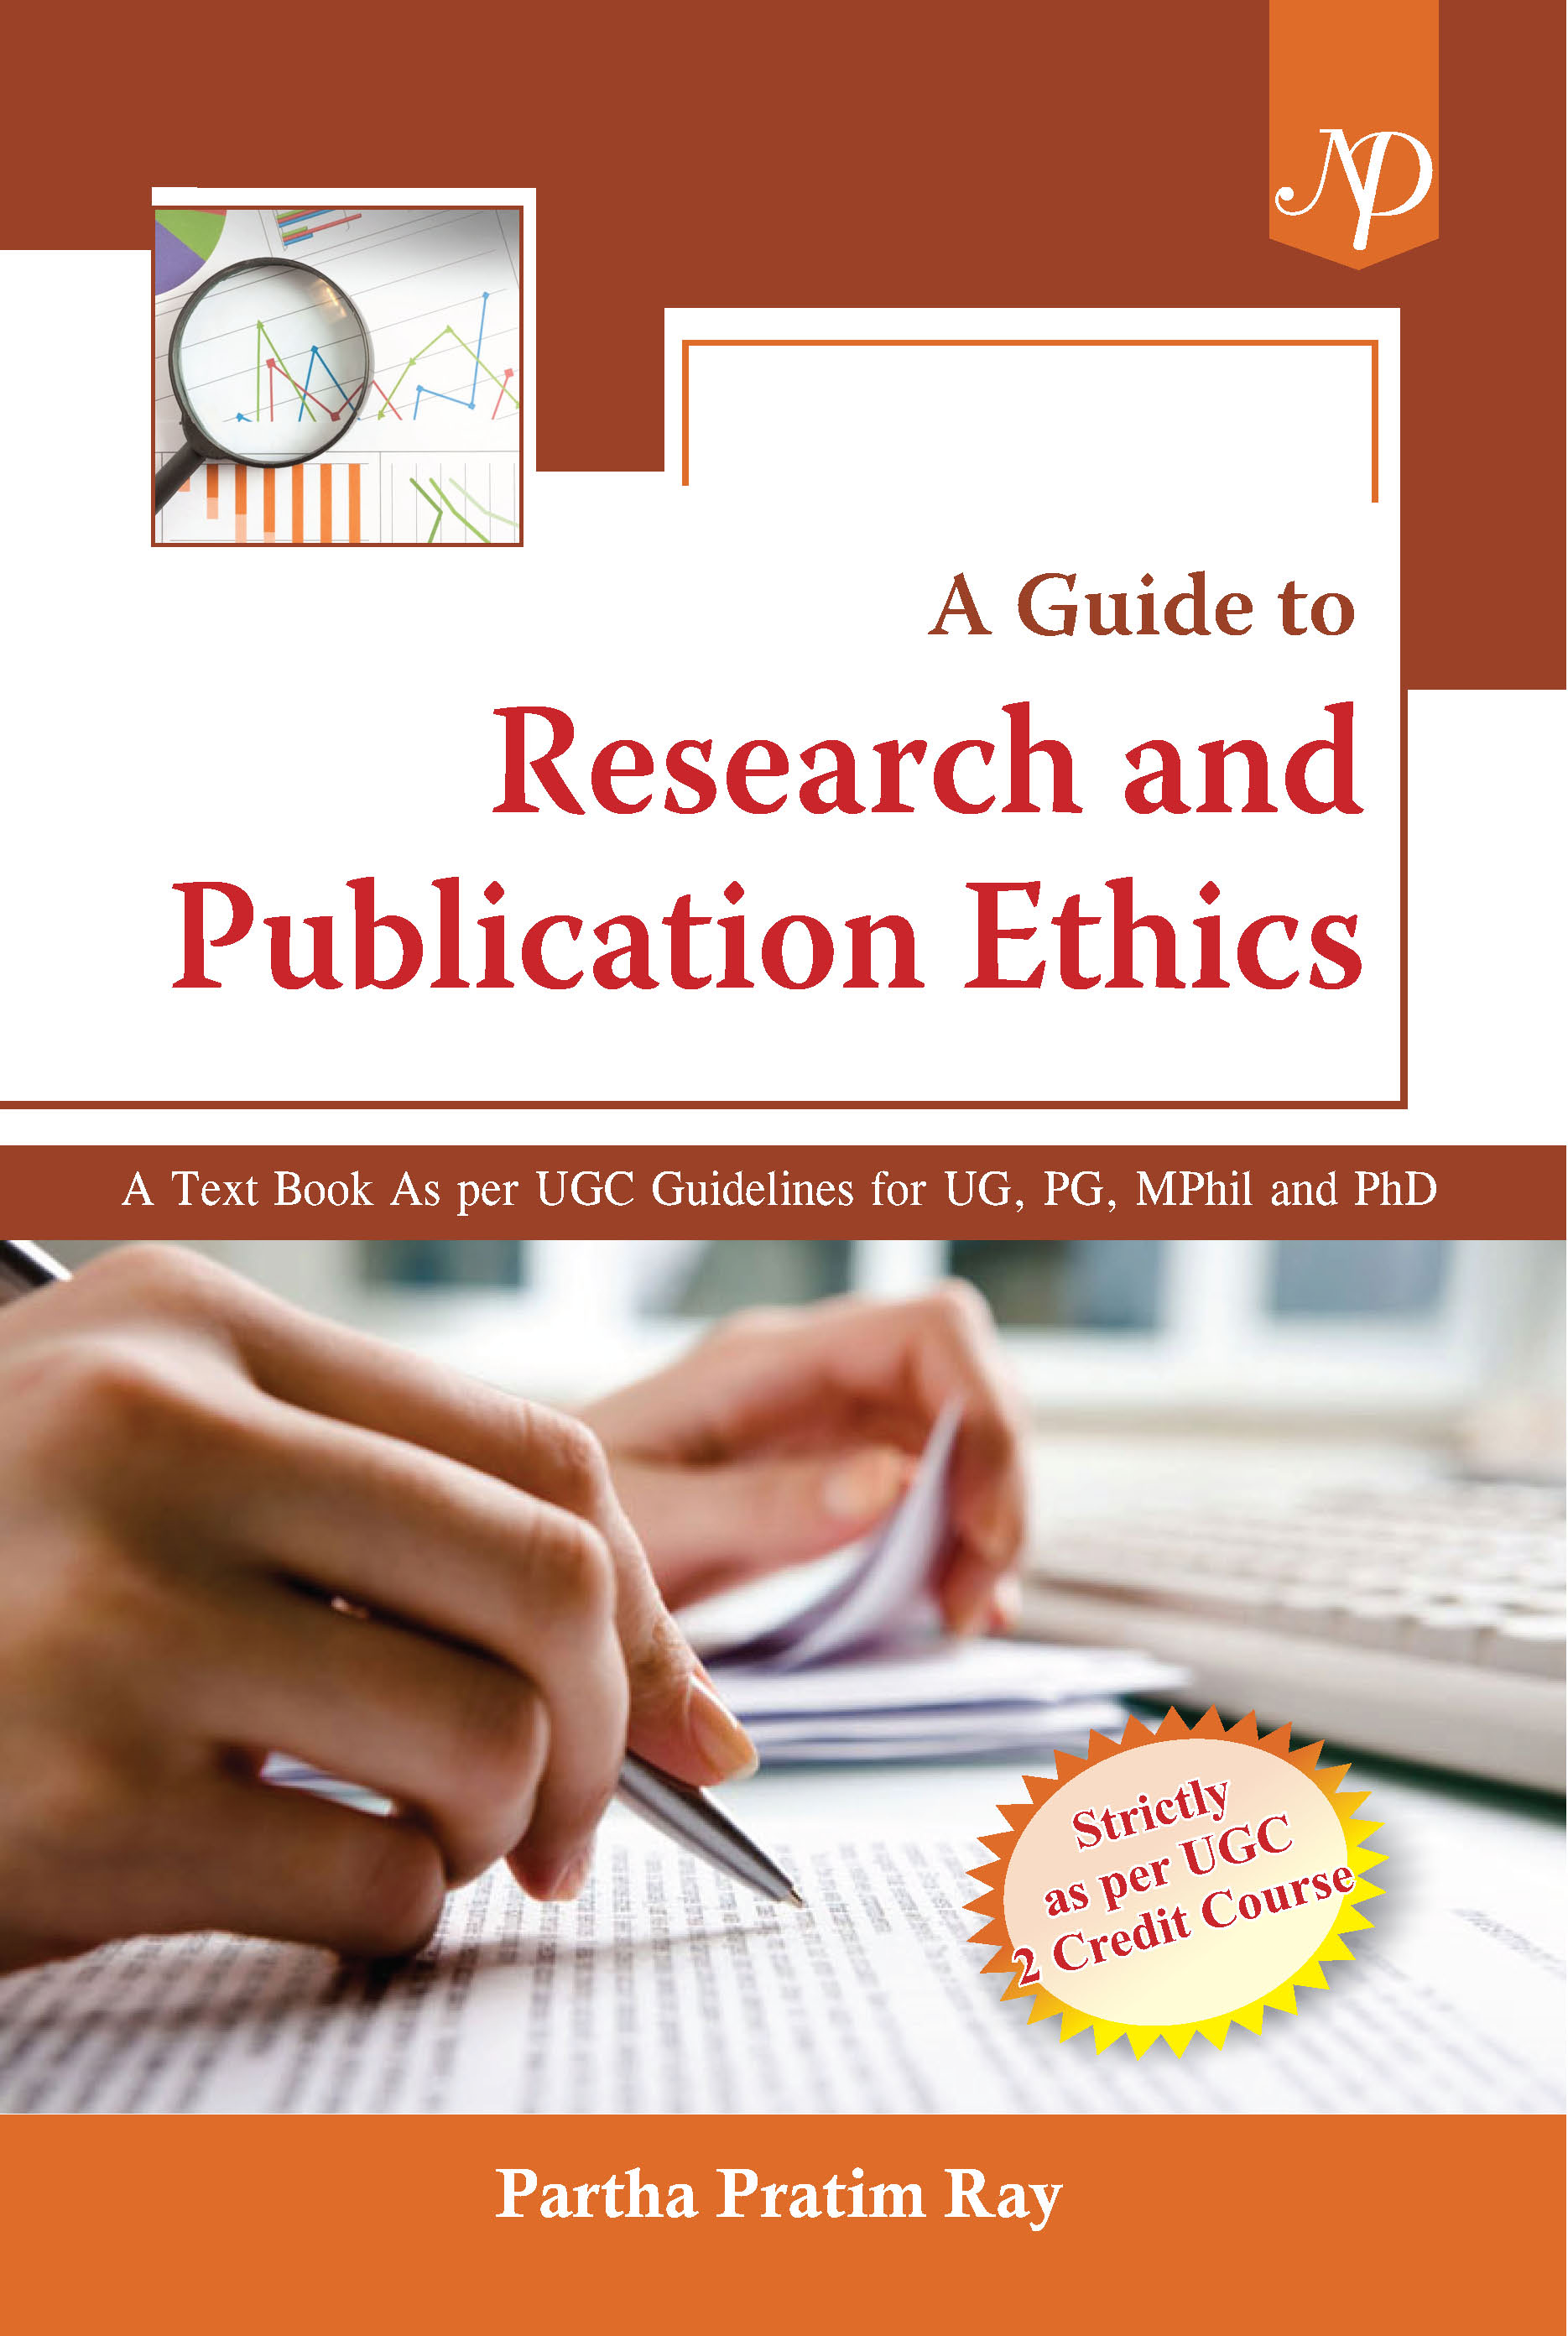 A Guide to Research and Publication Ethics A Text Book As per UGC Guidelines for UG, PG, MPhil and PhD